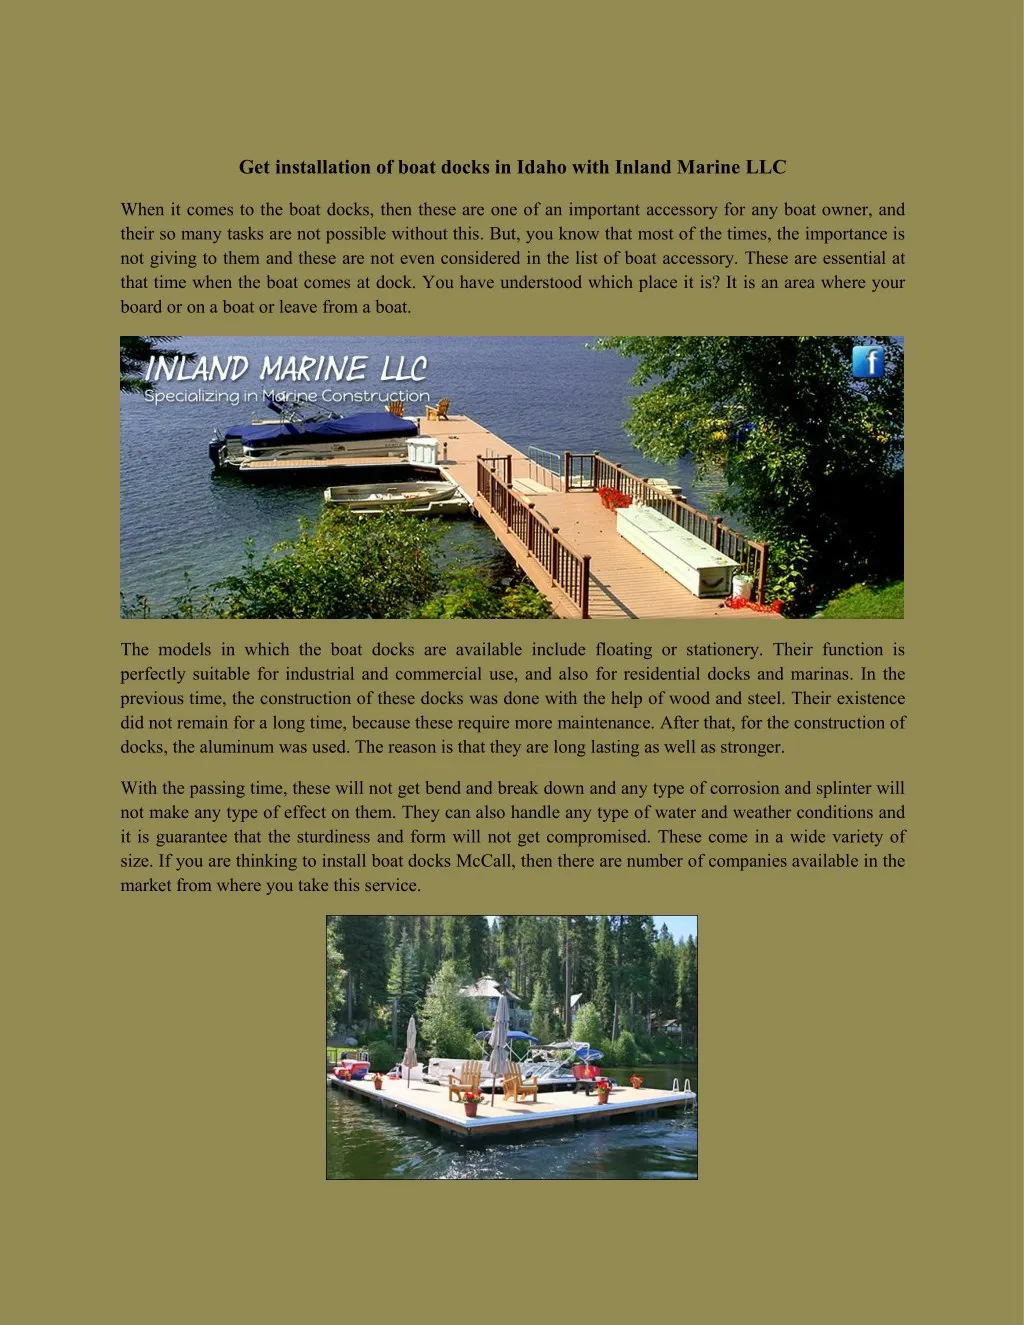 get installation of boat docks in idaho with